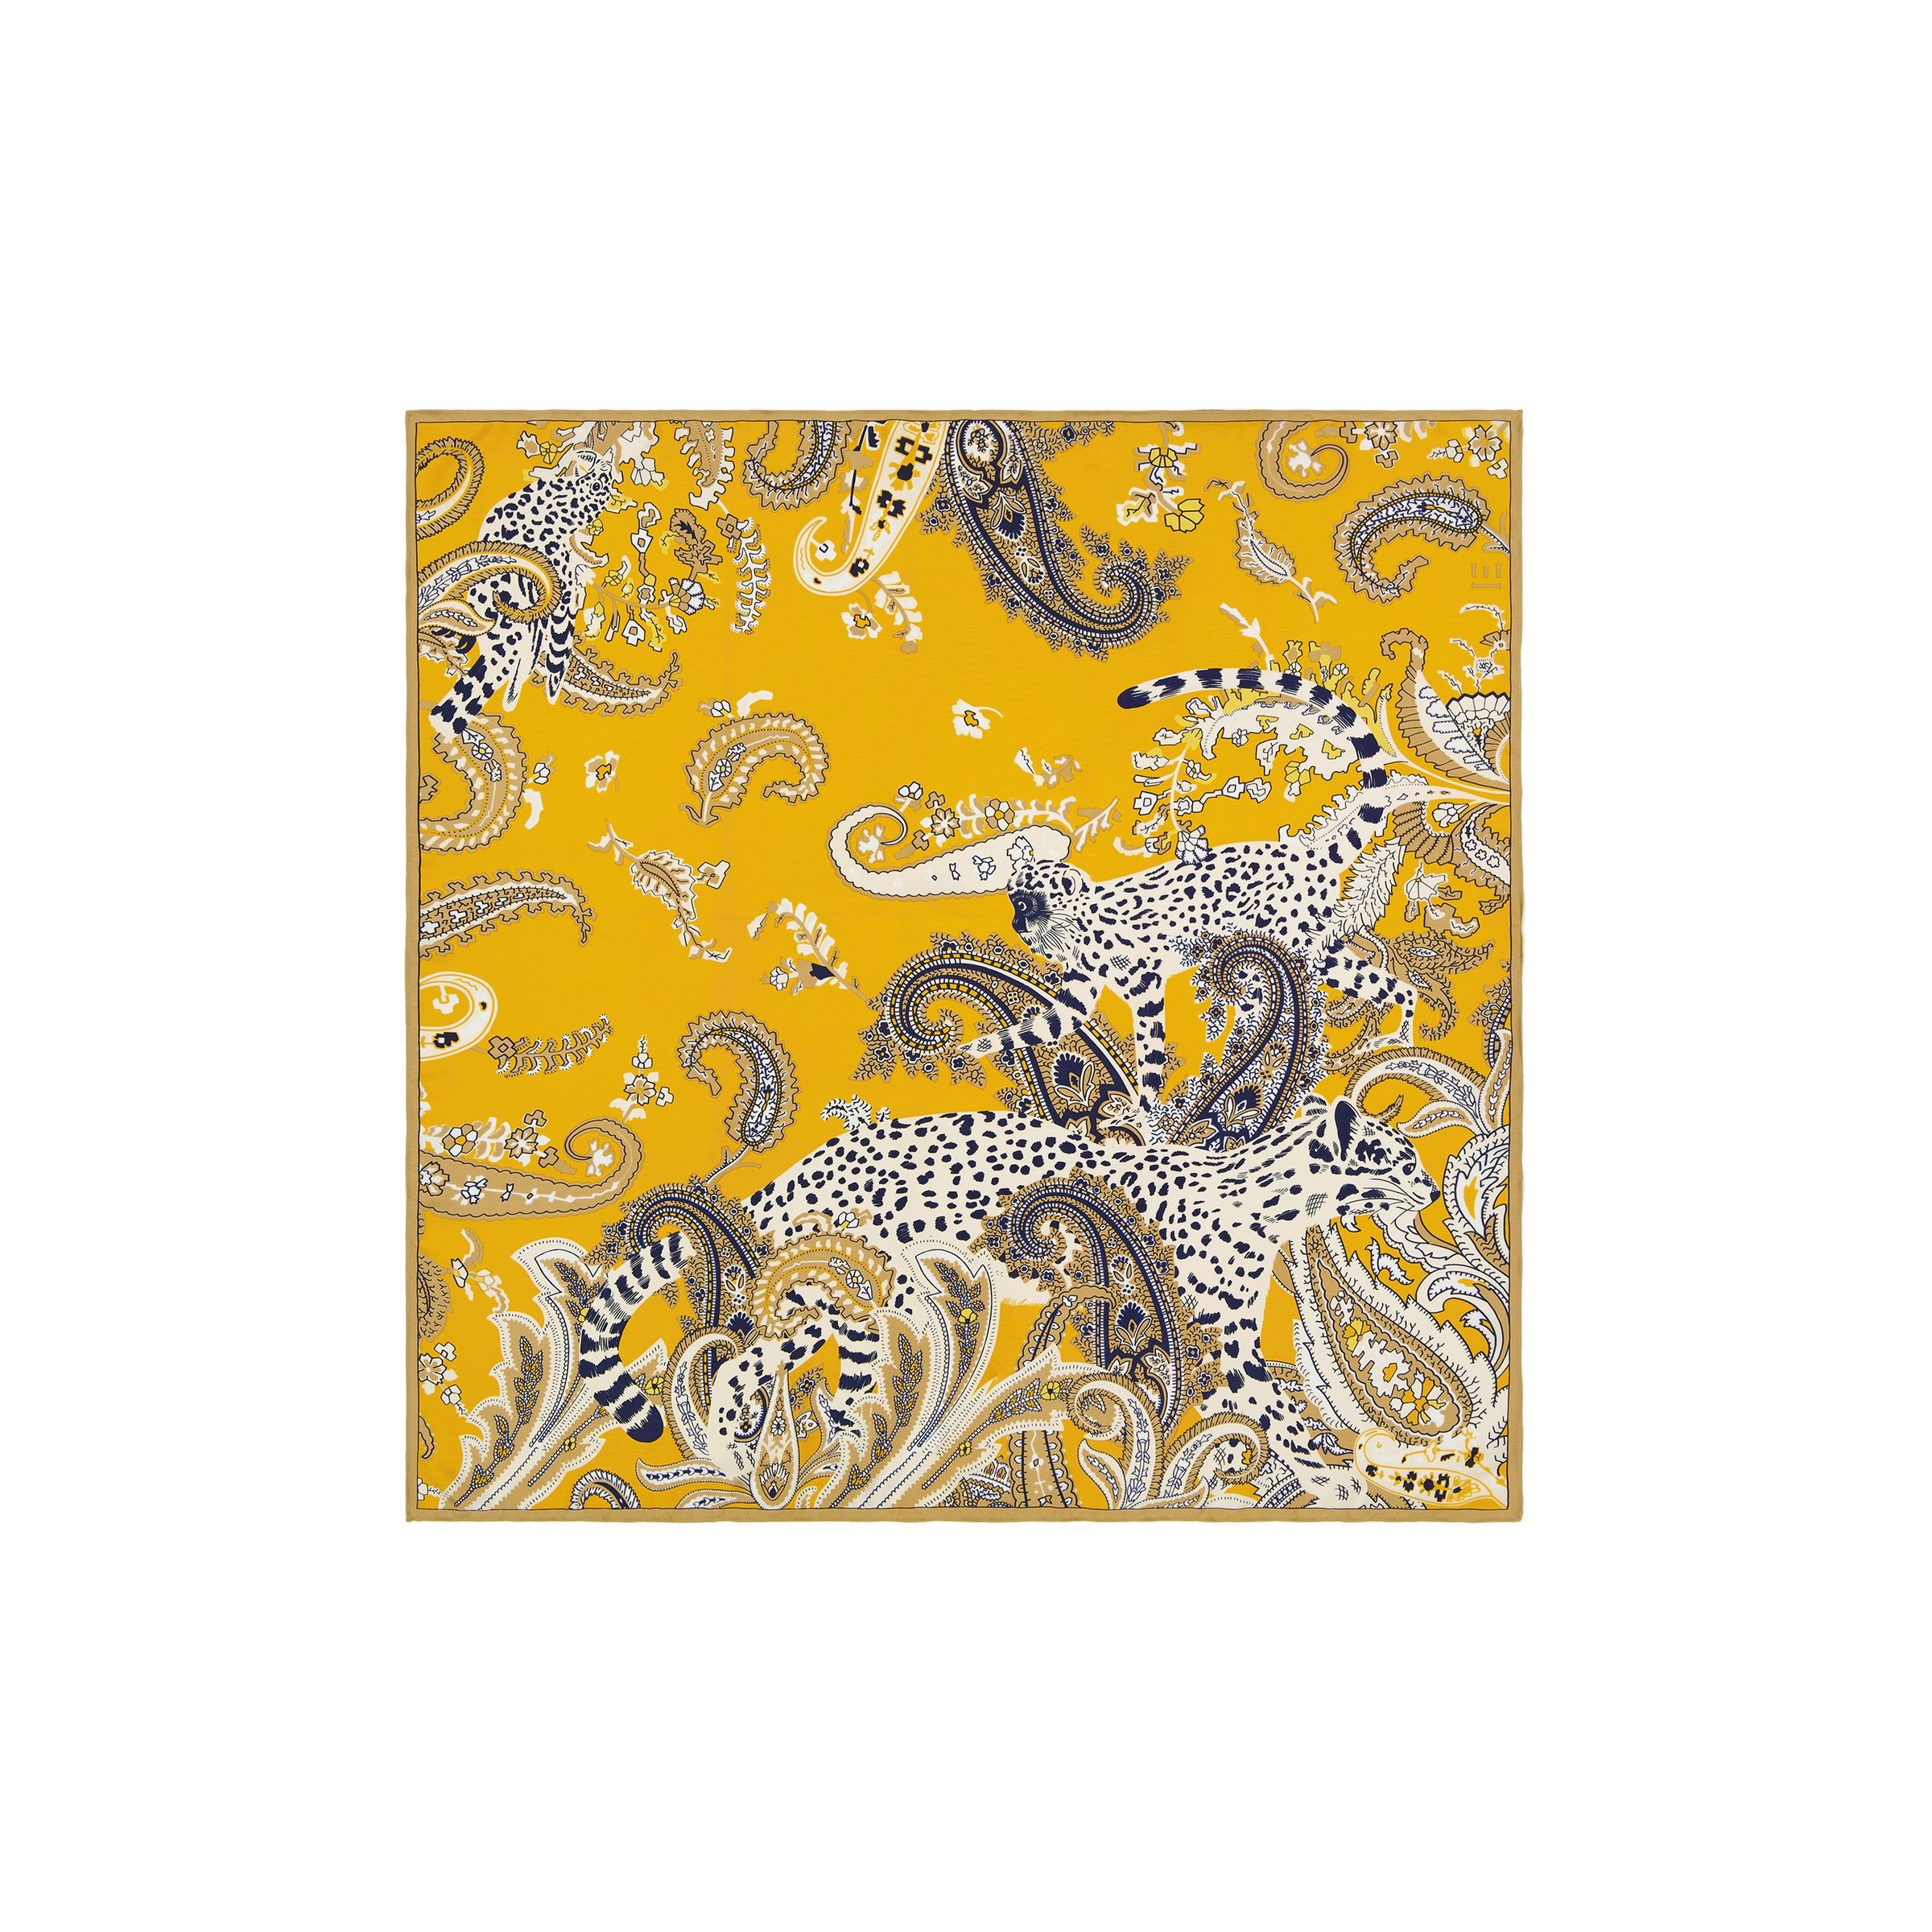 Square 100 - Paisley - Golden Brown